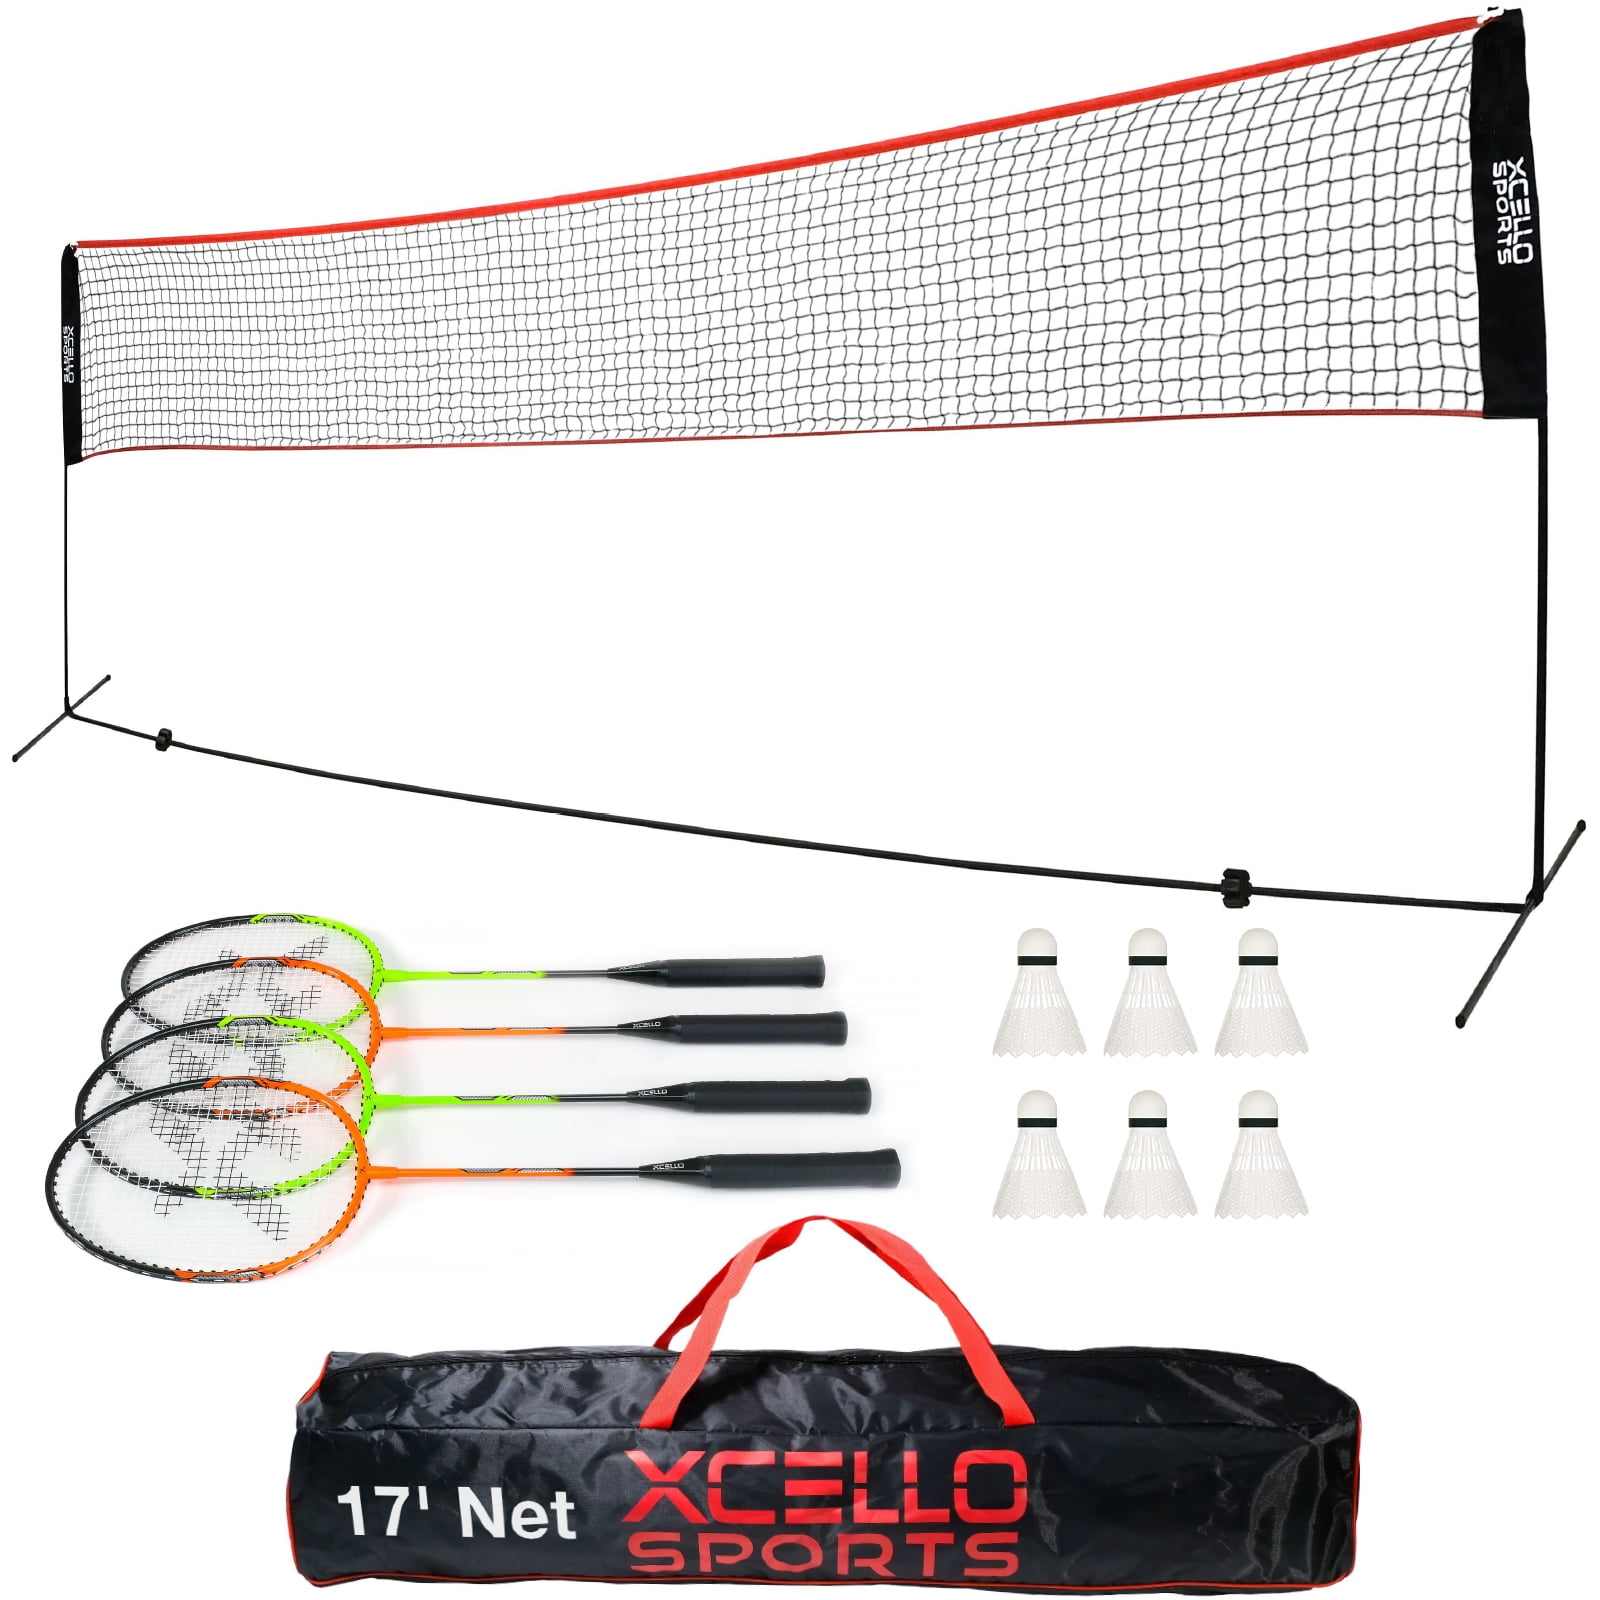 Details about    Portable Badminton Net Set with W/Freestanding Stand Recreation Game Equipment 